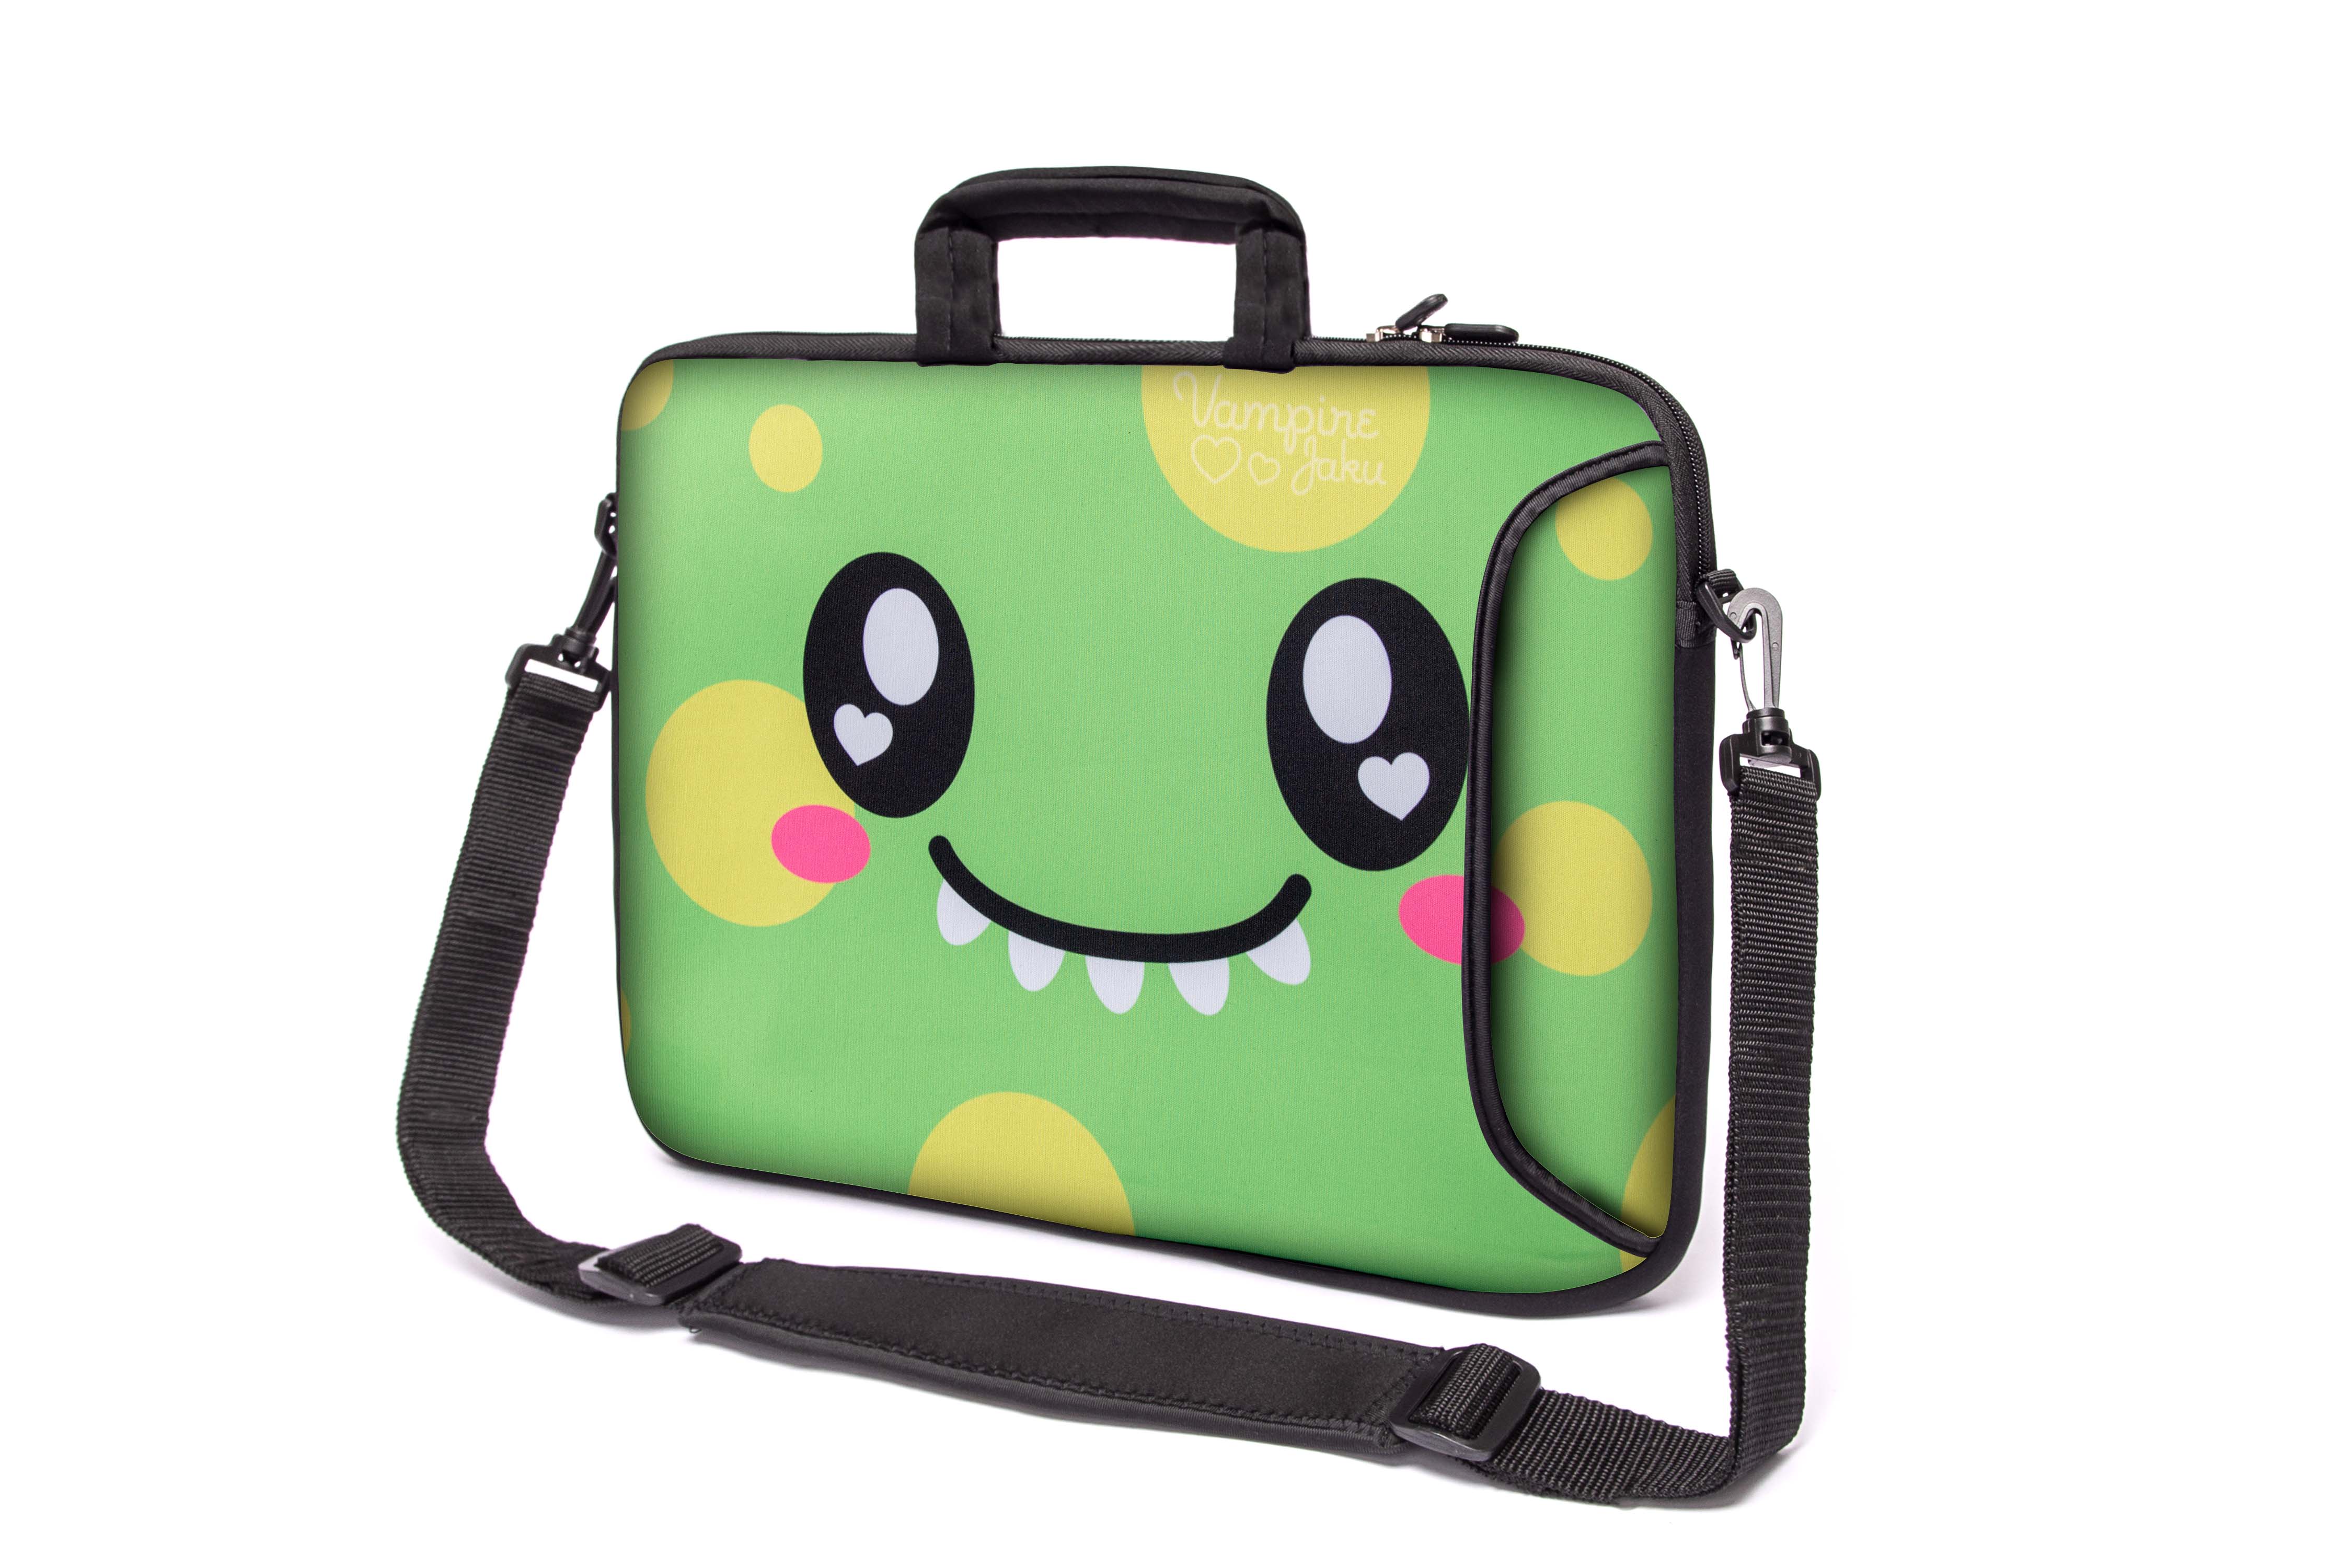 17"- 17.3" (inch) LAPTOP BAG/CASE WITH HANDLE & STRAP, NEOPRENE MADE FOR LAPTOPS/NOTEBOOKS, ZIPPED*SWEET GREN*